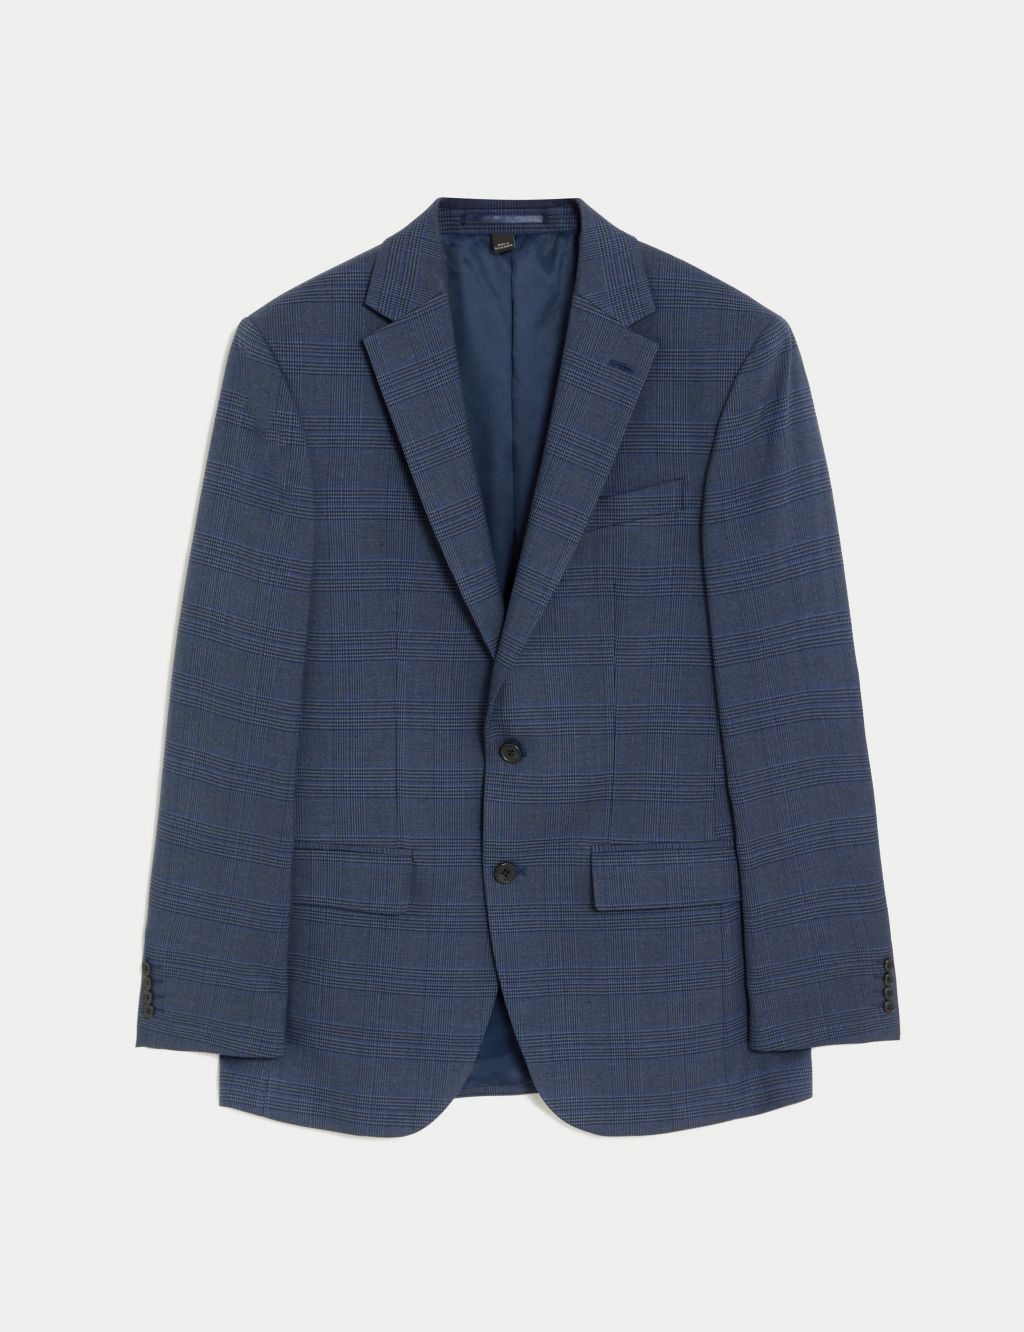 Regular Fit Prince of Wales Check Suit Jacket image 2